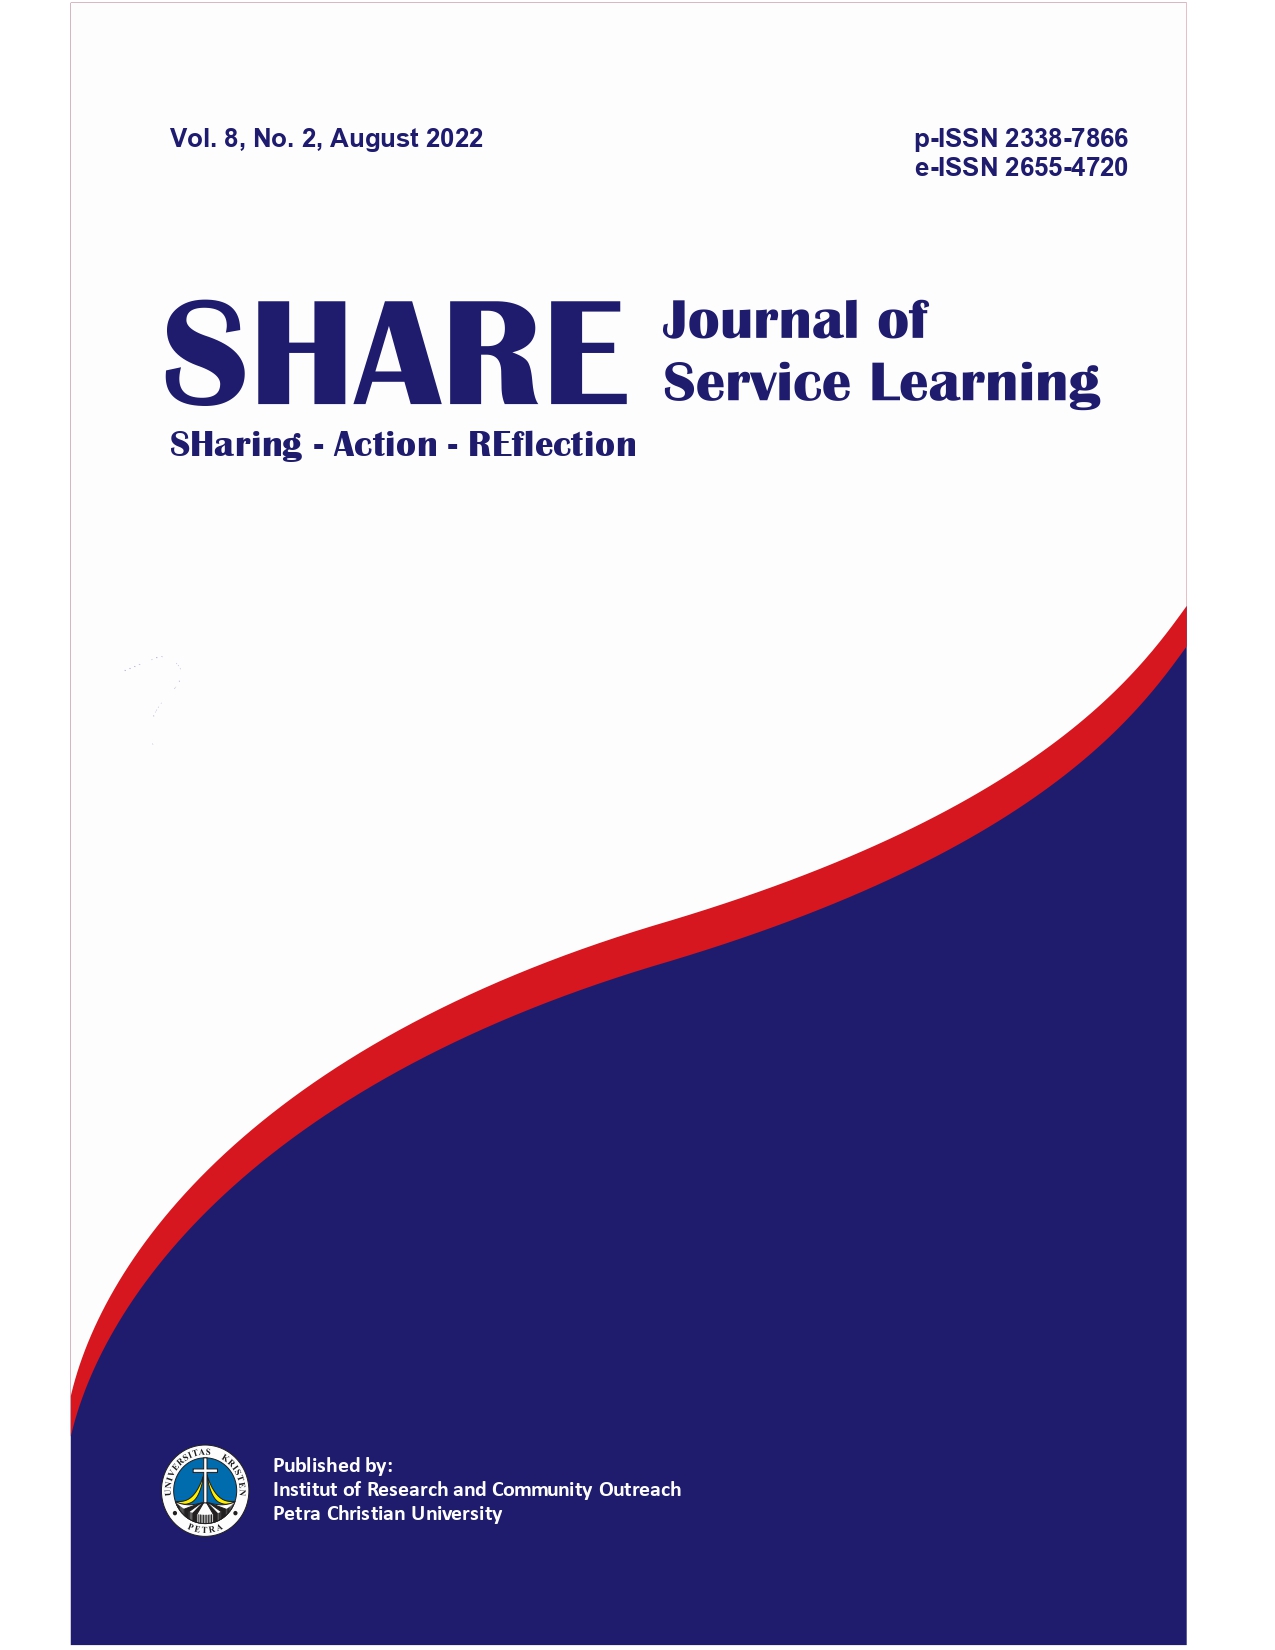 Share: Journal of Service Learning